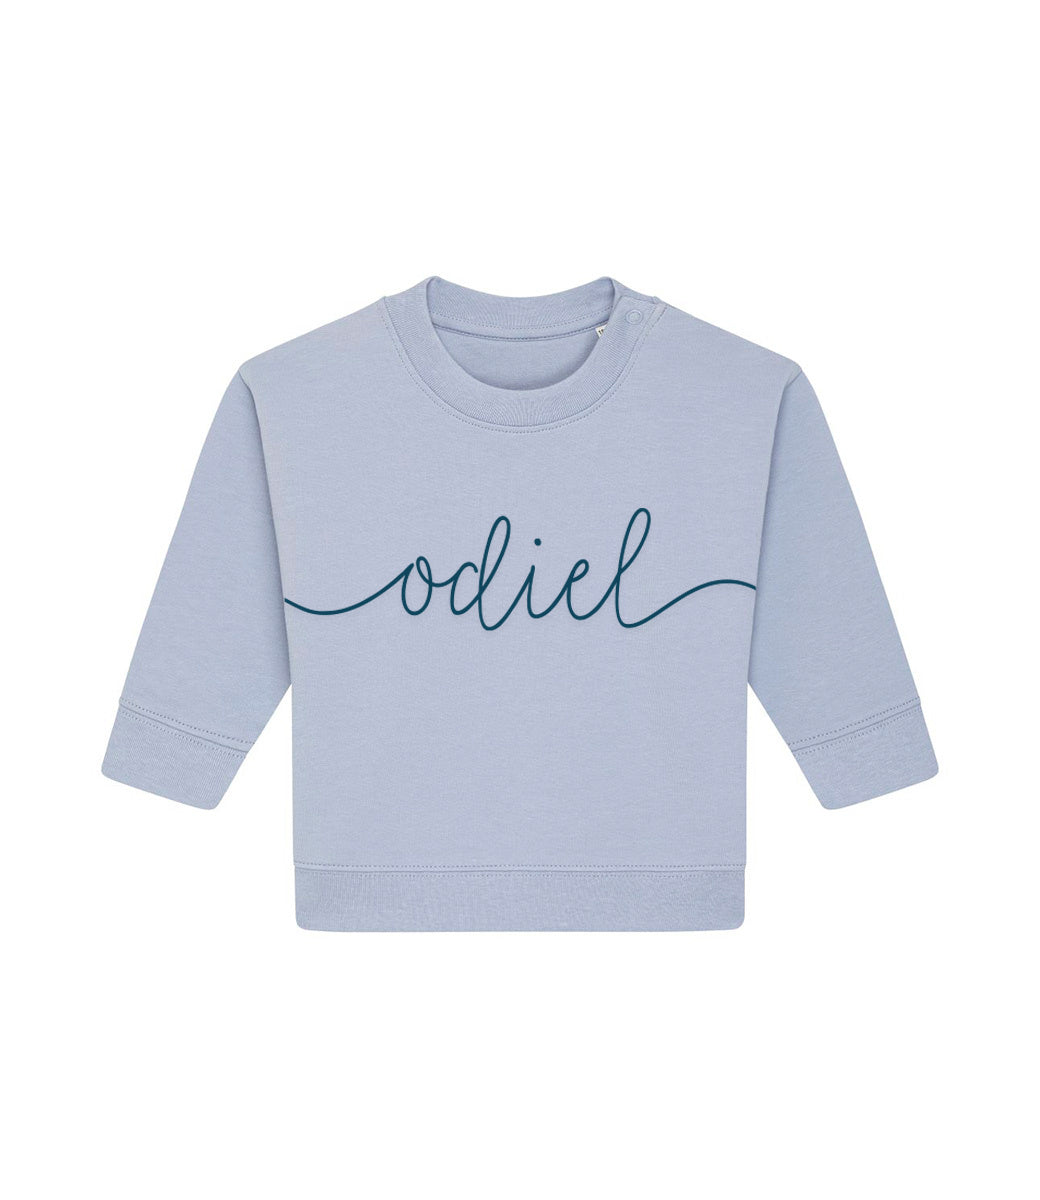 Baby name sweater // Flow